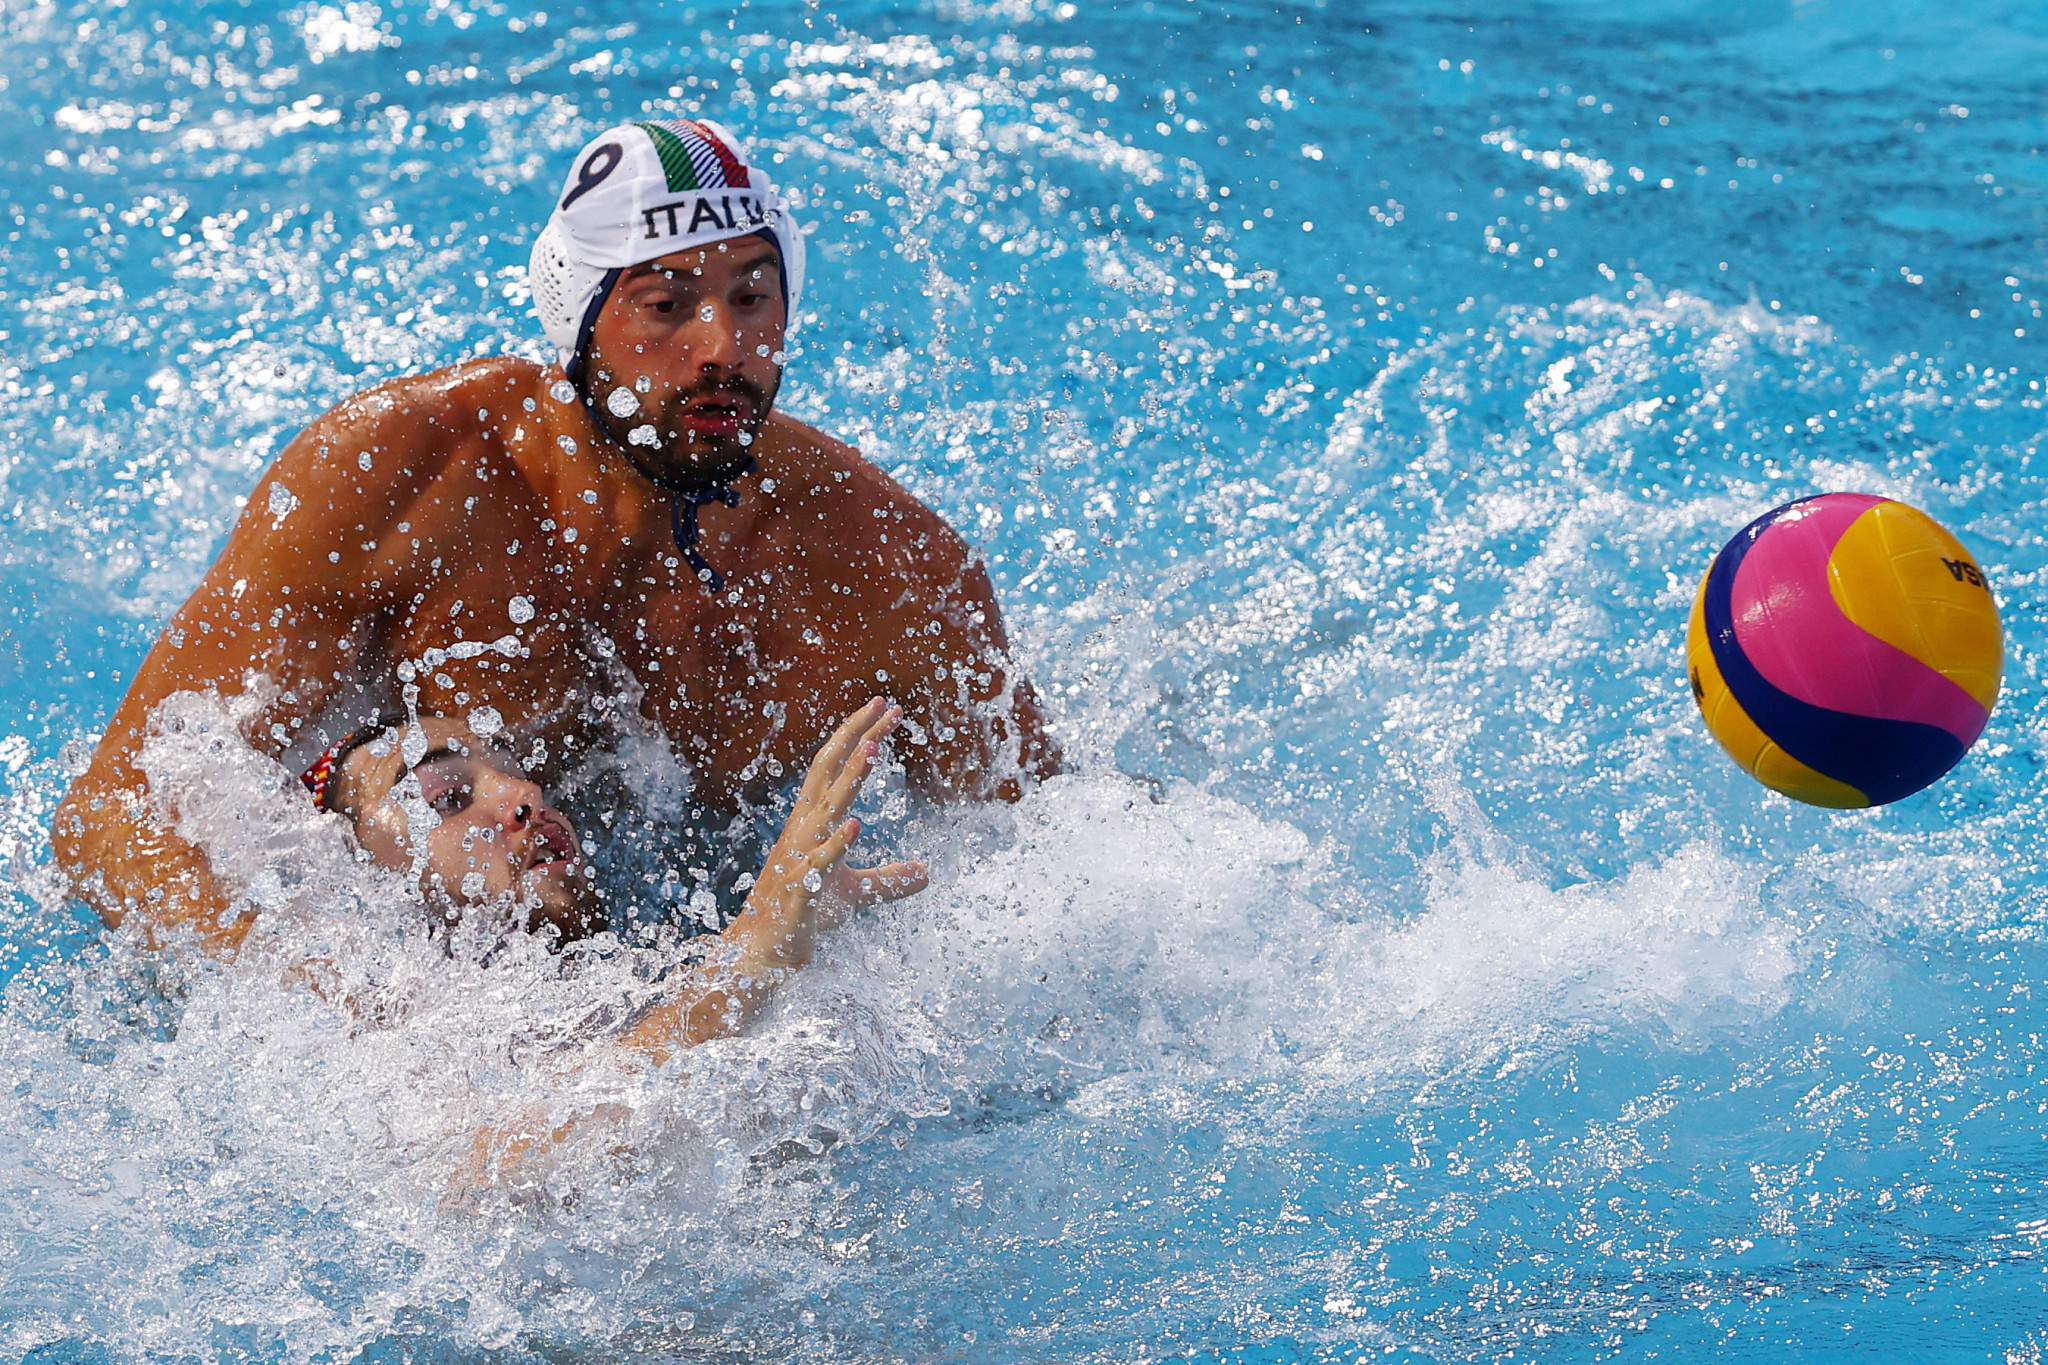 Italy beat Spain to set up FINA Men's Water Polo World League final